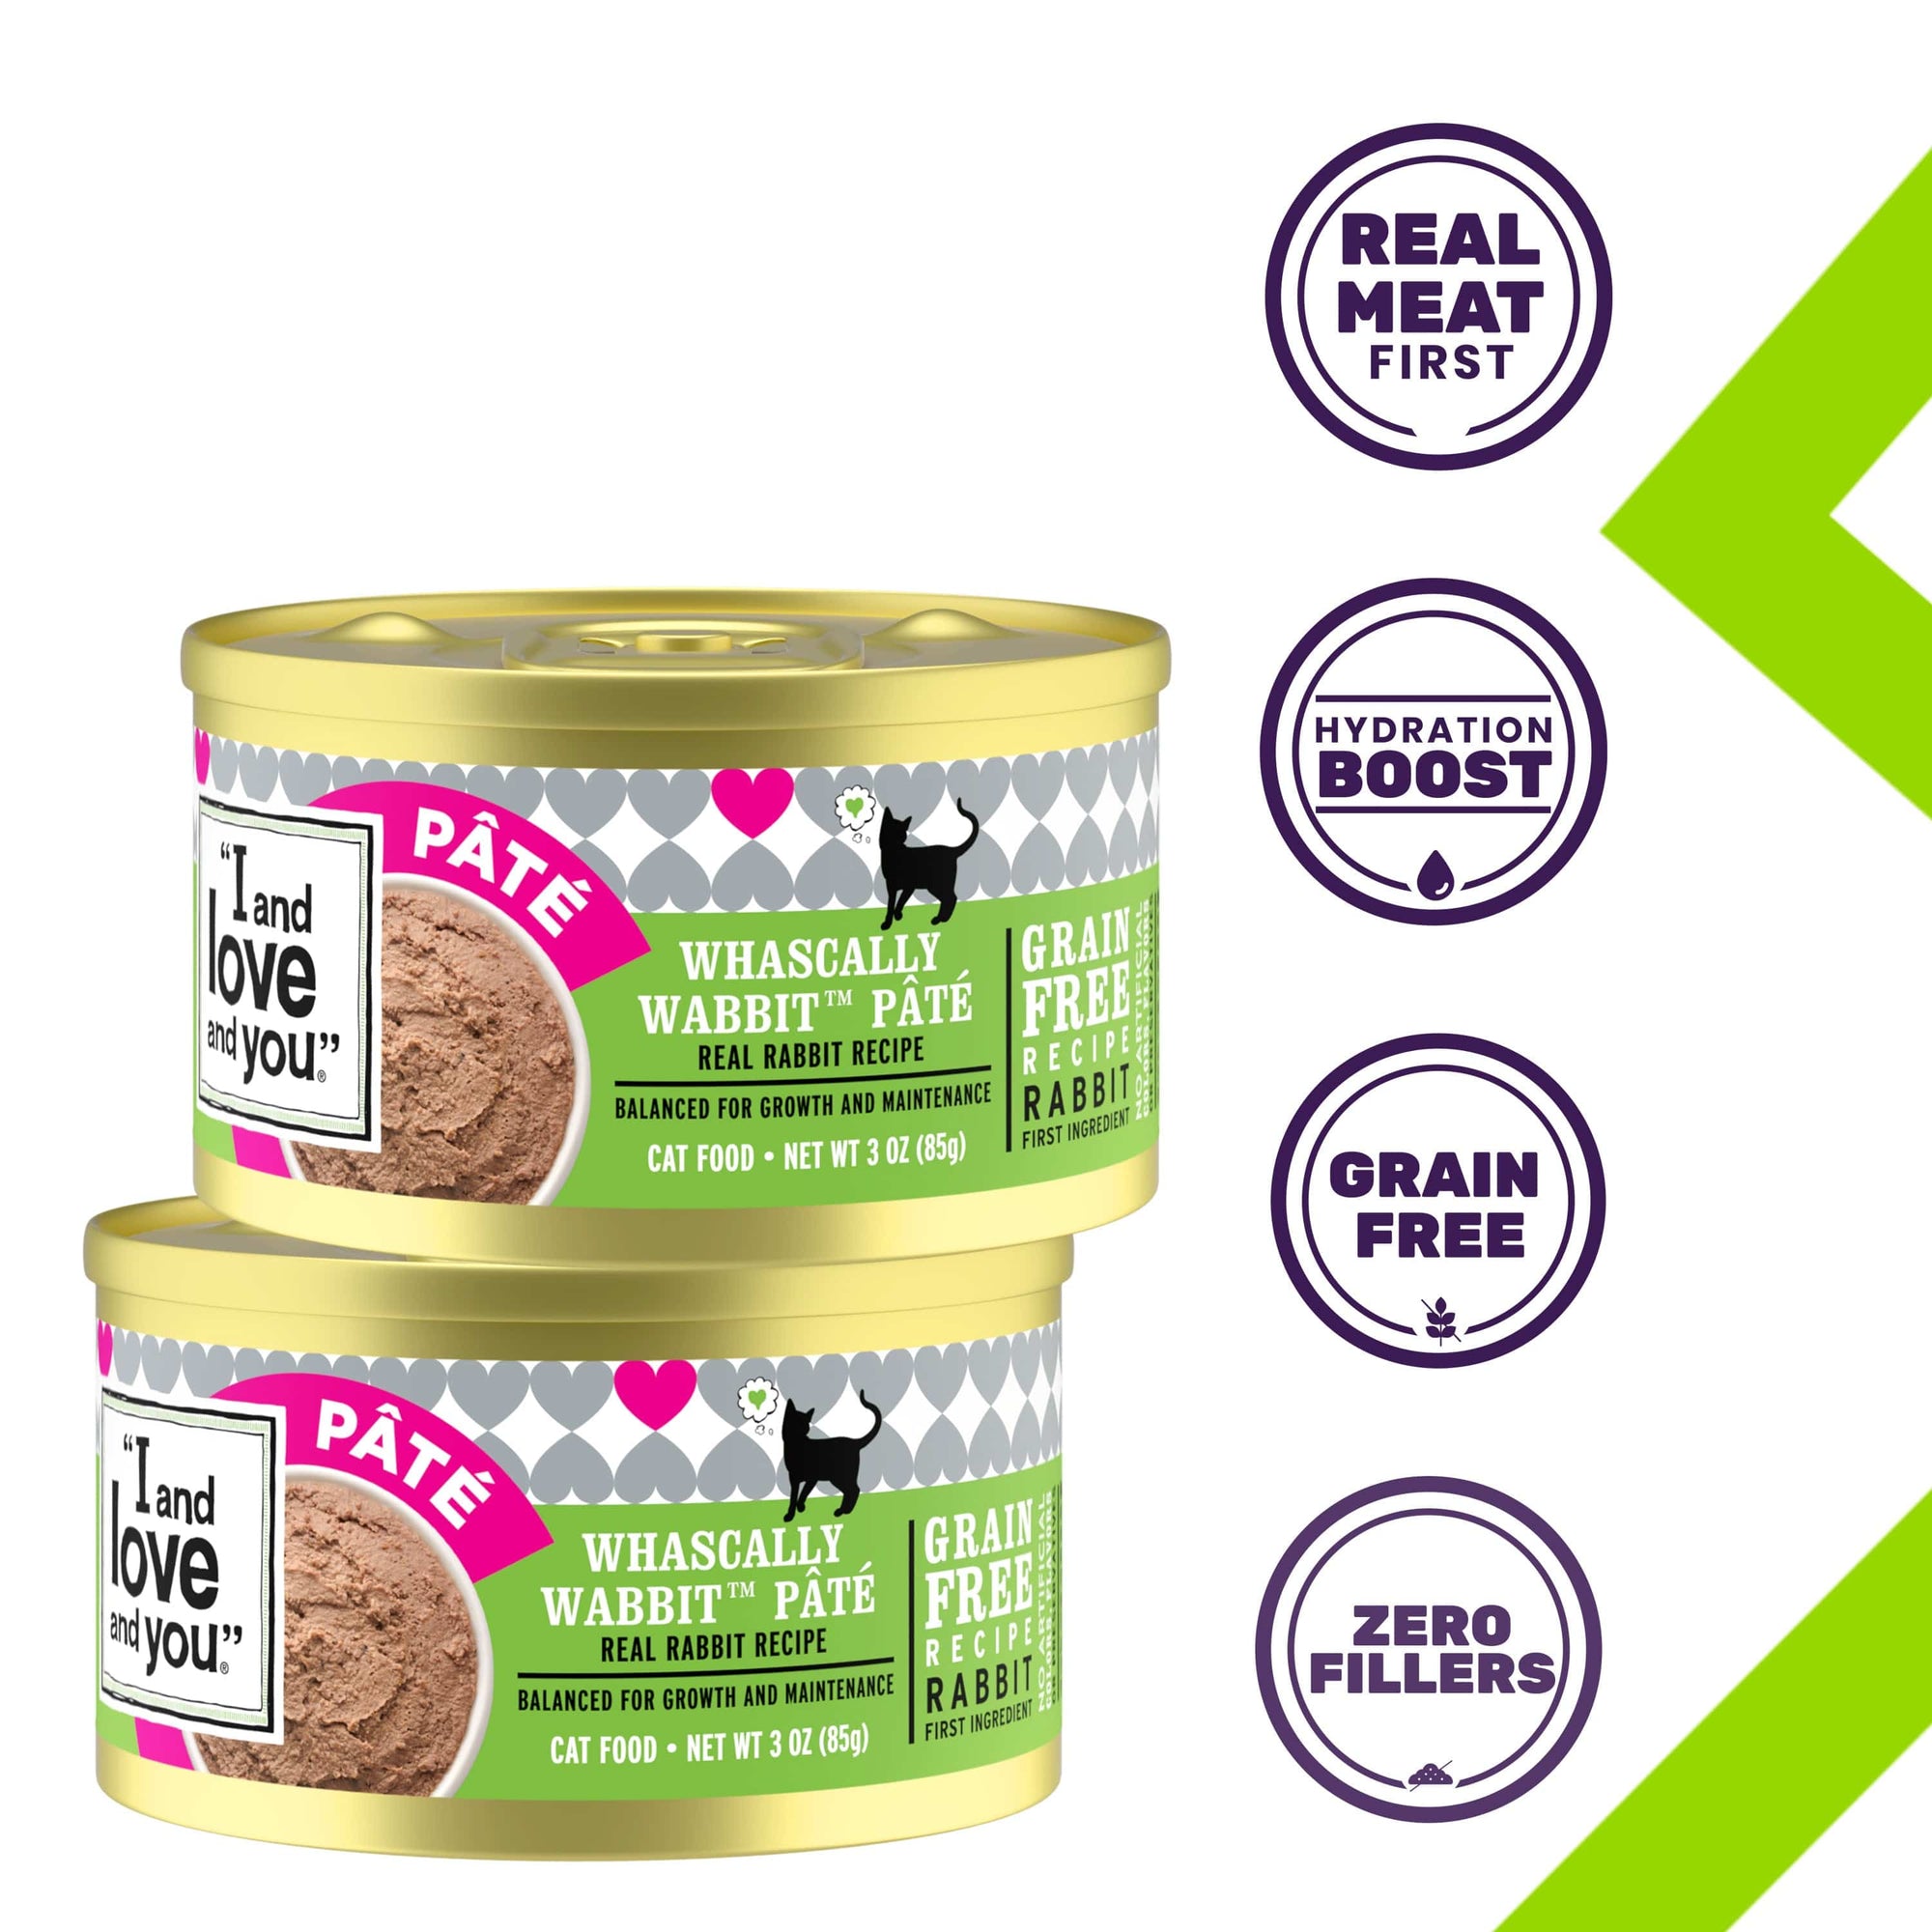 A group of cans of Whascally Wabbit Pâté cat food, showcasing product features such as real meat first, hydration boost, grain free and zero fillers.